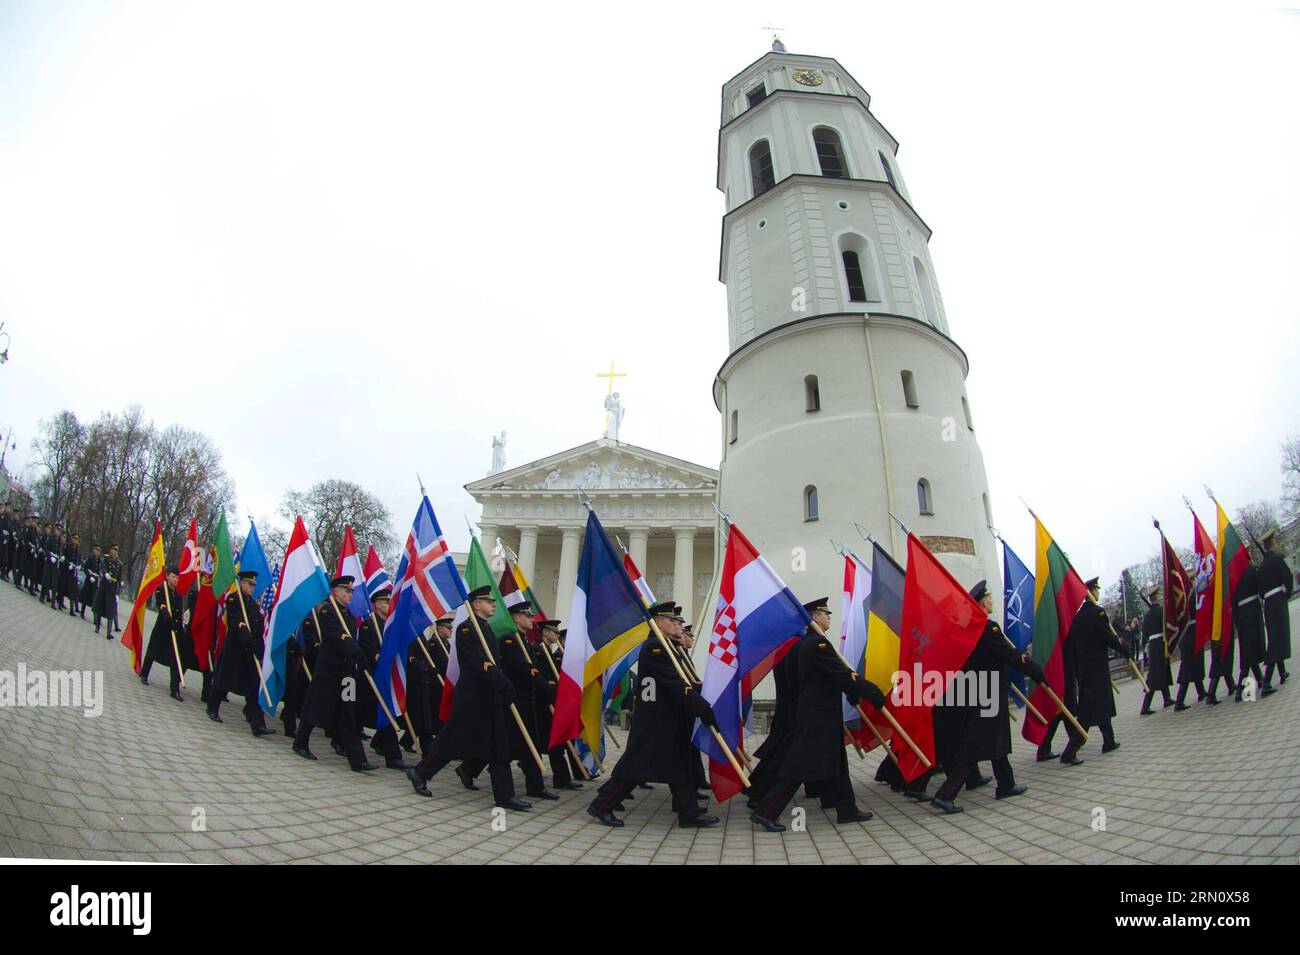 (141123) -- VILNIUS, Nov. 23, 2014 -- Guard of honor carry the flags of NATO member countries on the celebration in Vilnius, Lithuania, on Nov. 23, 2014. Lithuanian armed forces and troops of some NATO member countries held a gala with formation on Sunday to celebrate the Armed Forces Day. Lithuania s first decree on establishing armed forces was approved on Nov. 23, 1918, which became the Armed Forces Day of the Baltic country. )(bxq) LITHUANIA-VILNIUS-ARMED FORCES DAY AlfredasxPliadis PUBLICATIONxNOTxINxCHN   Vilnius Nov 23 2014 Guard of HONOR Carry The Flags of NATO member Countries ON The Stock Photo